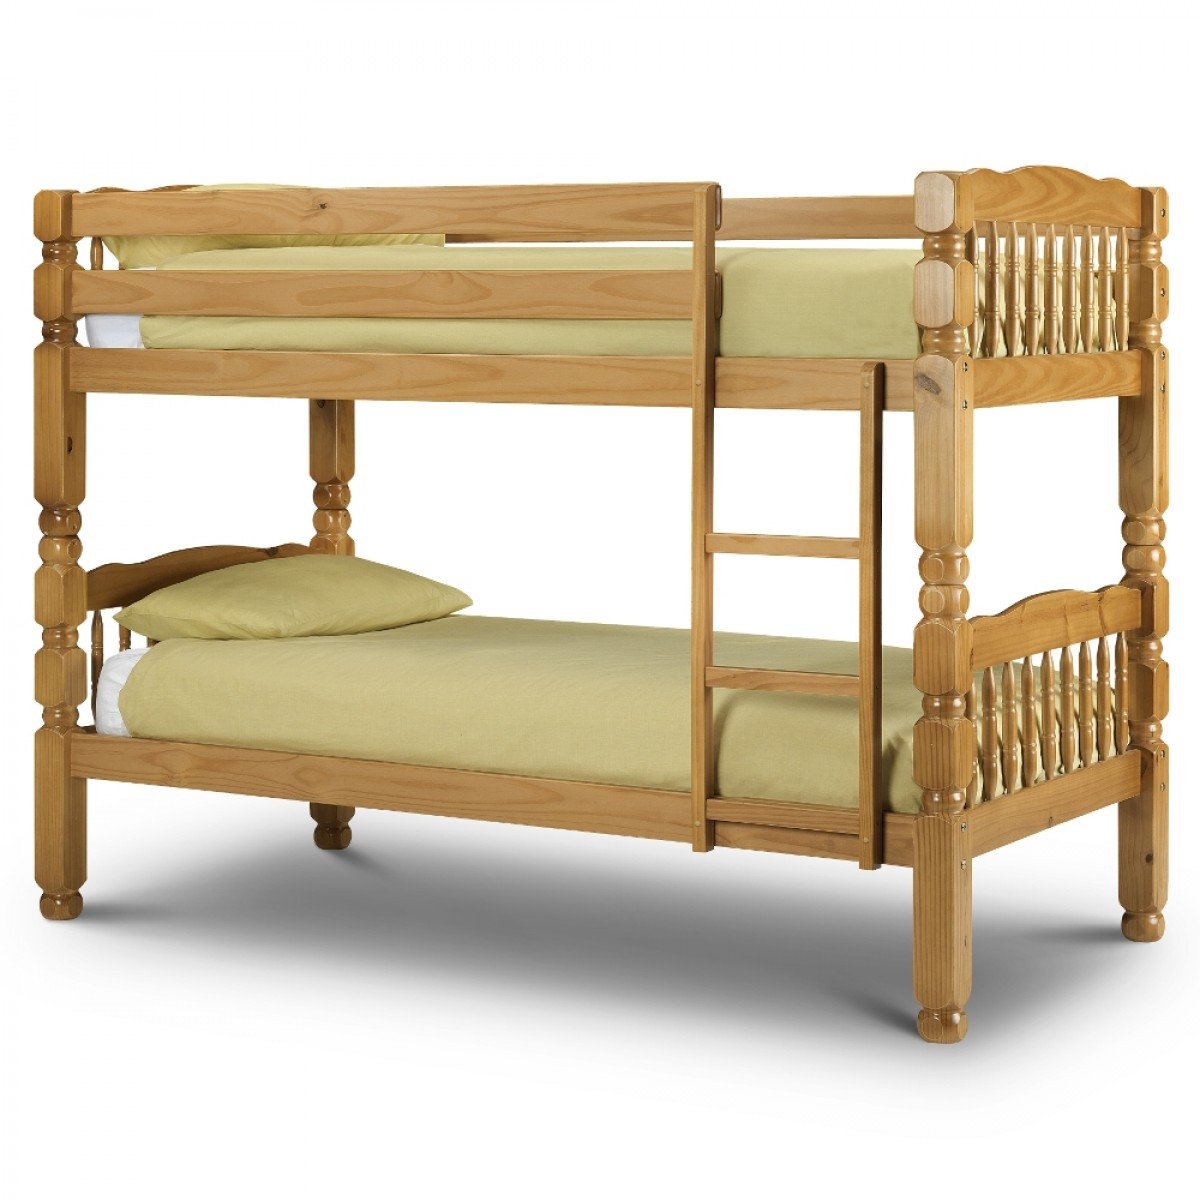 With Drawers Storage Bunk Bed, Solid Pine Bunk Beds With Storage